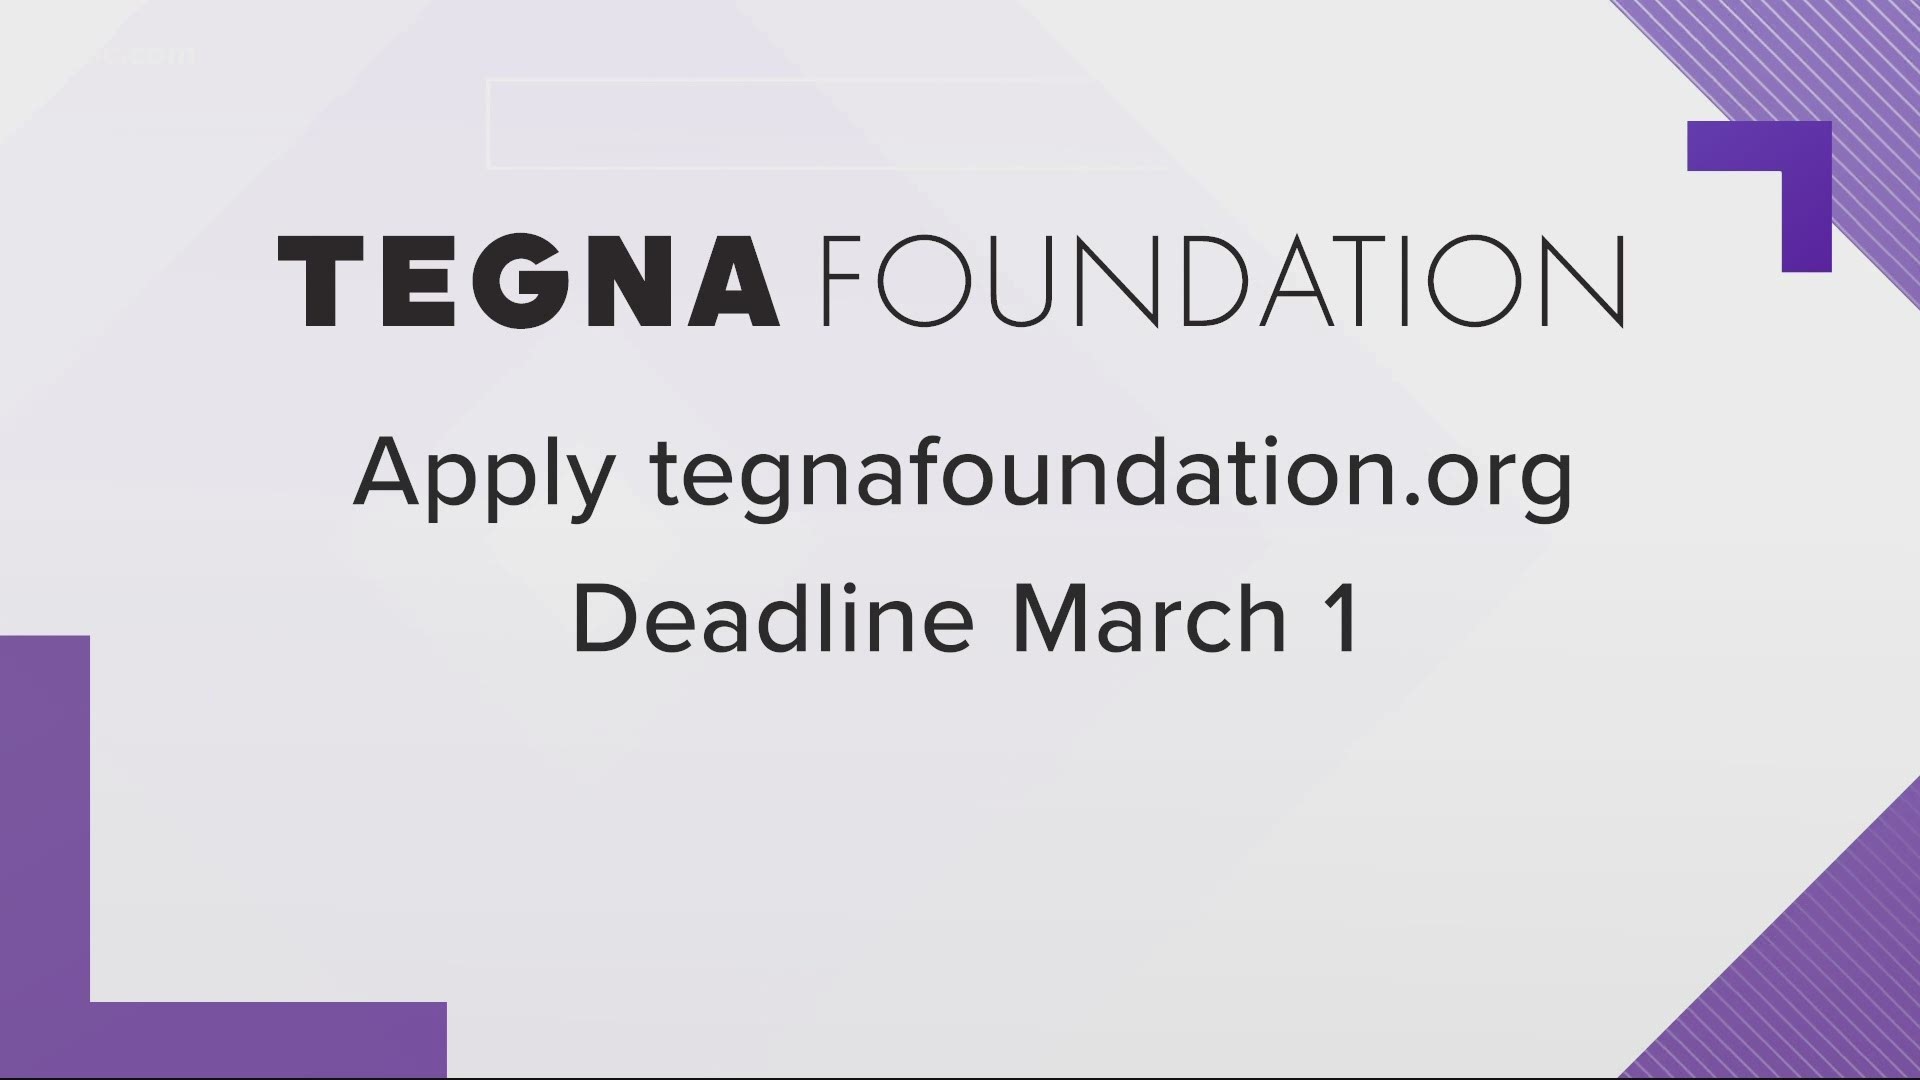 Many nonprofits in the Charlotte area are seeing double and even triple the number of people seeking assistance.  A TEGNA Foundation grant could help with funding.